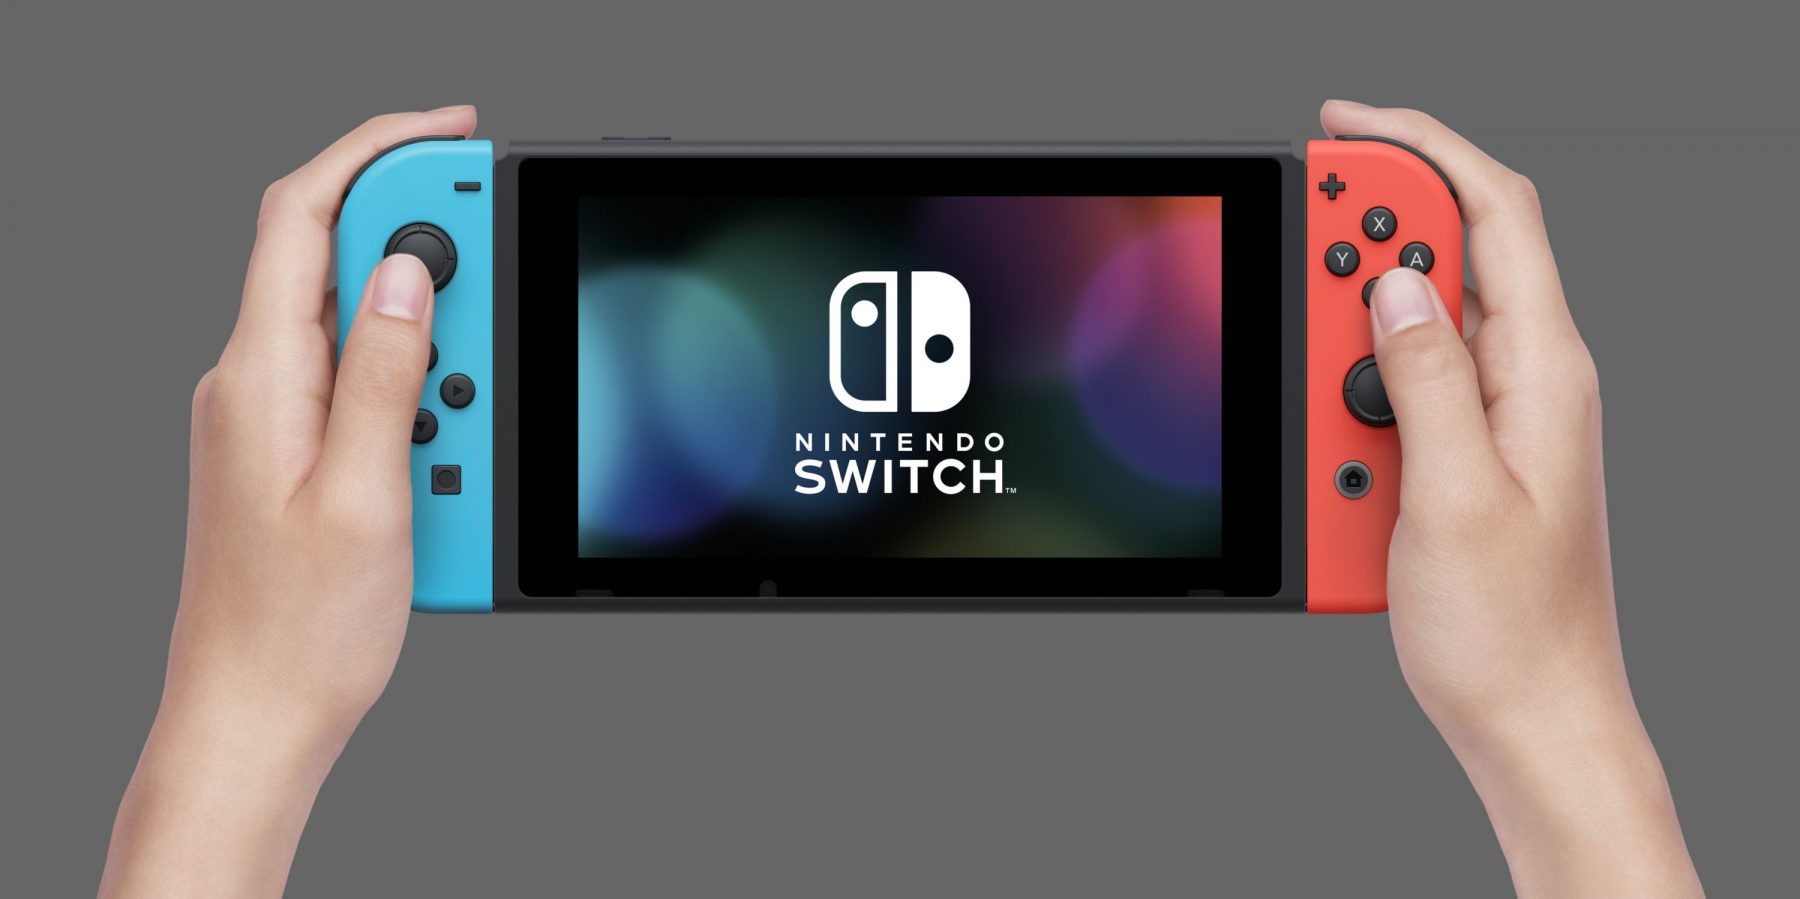 The price is right for the nintendo switch’s online service